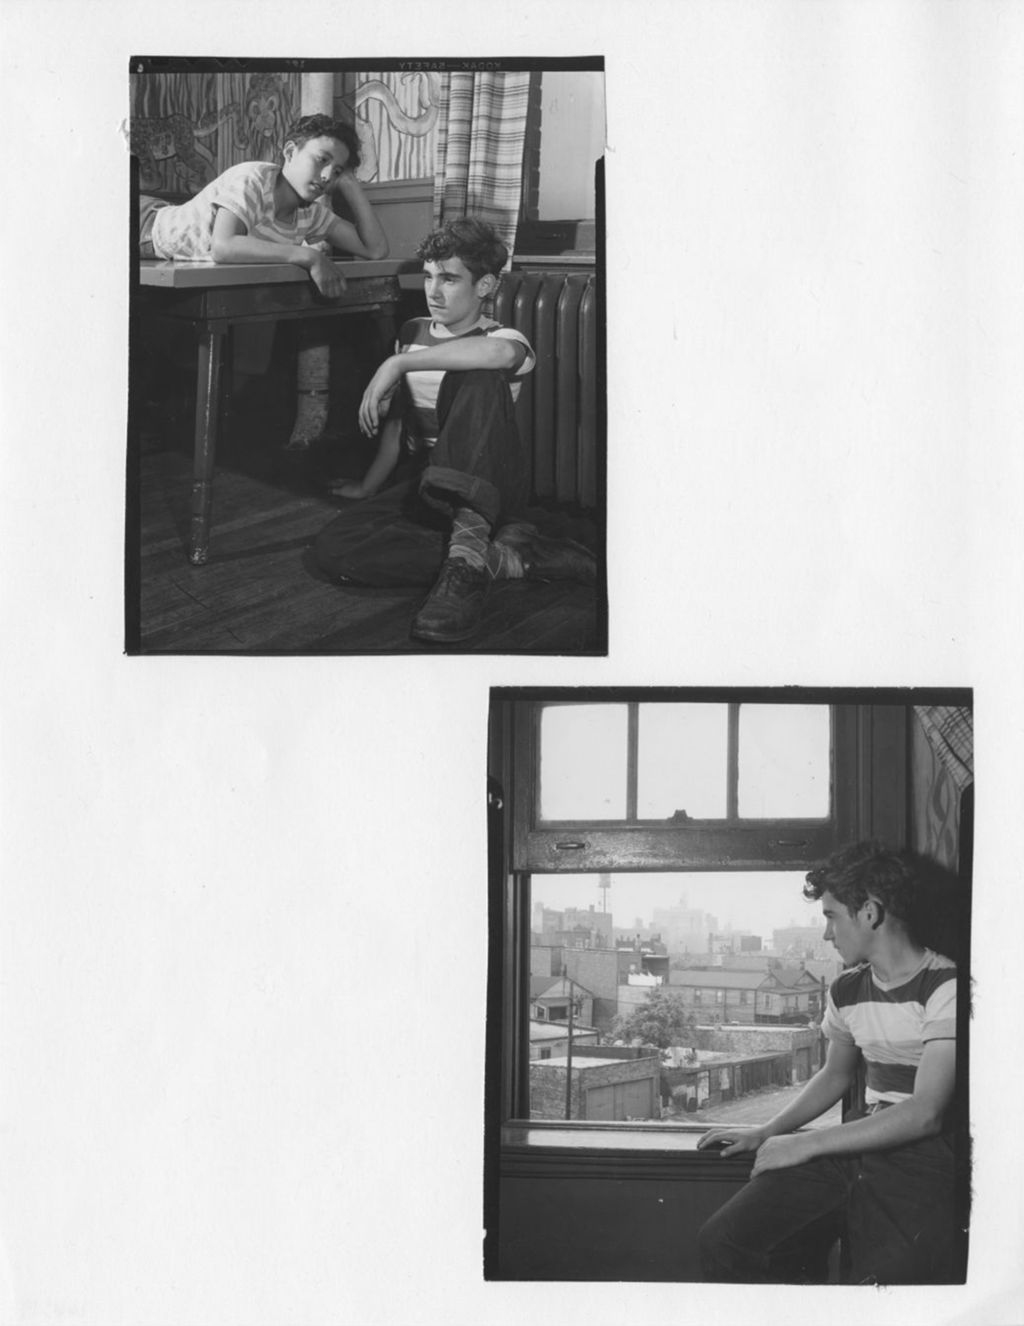 Miniature of (Top photo) Two boys hanging out; (Bottom photo) Boy looking out window